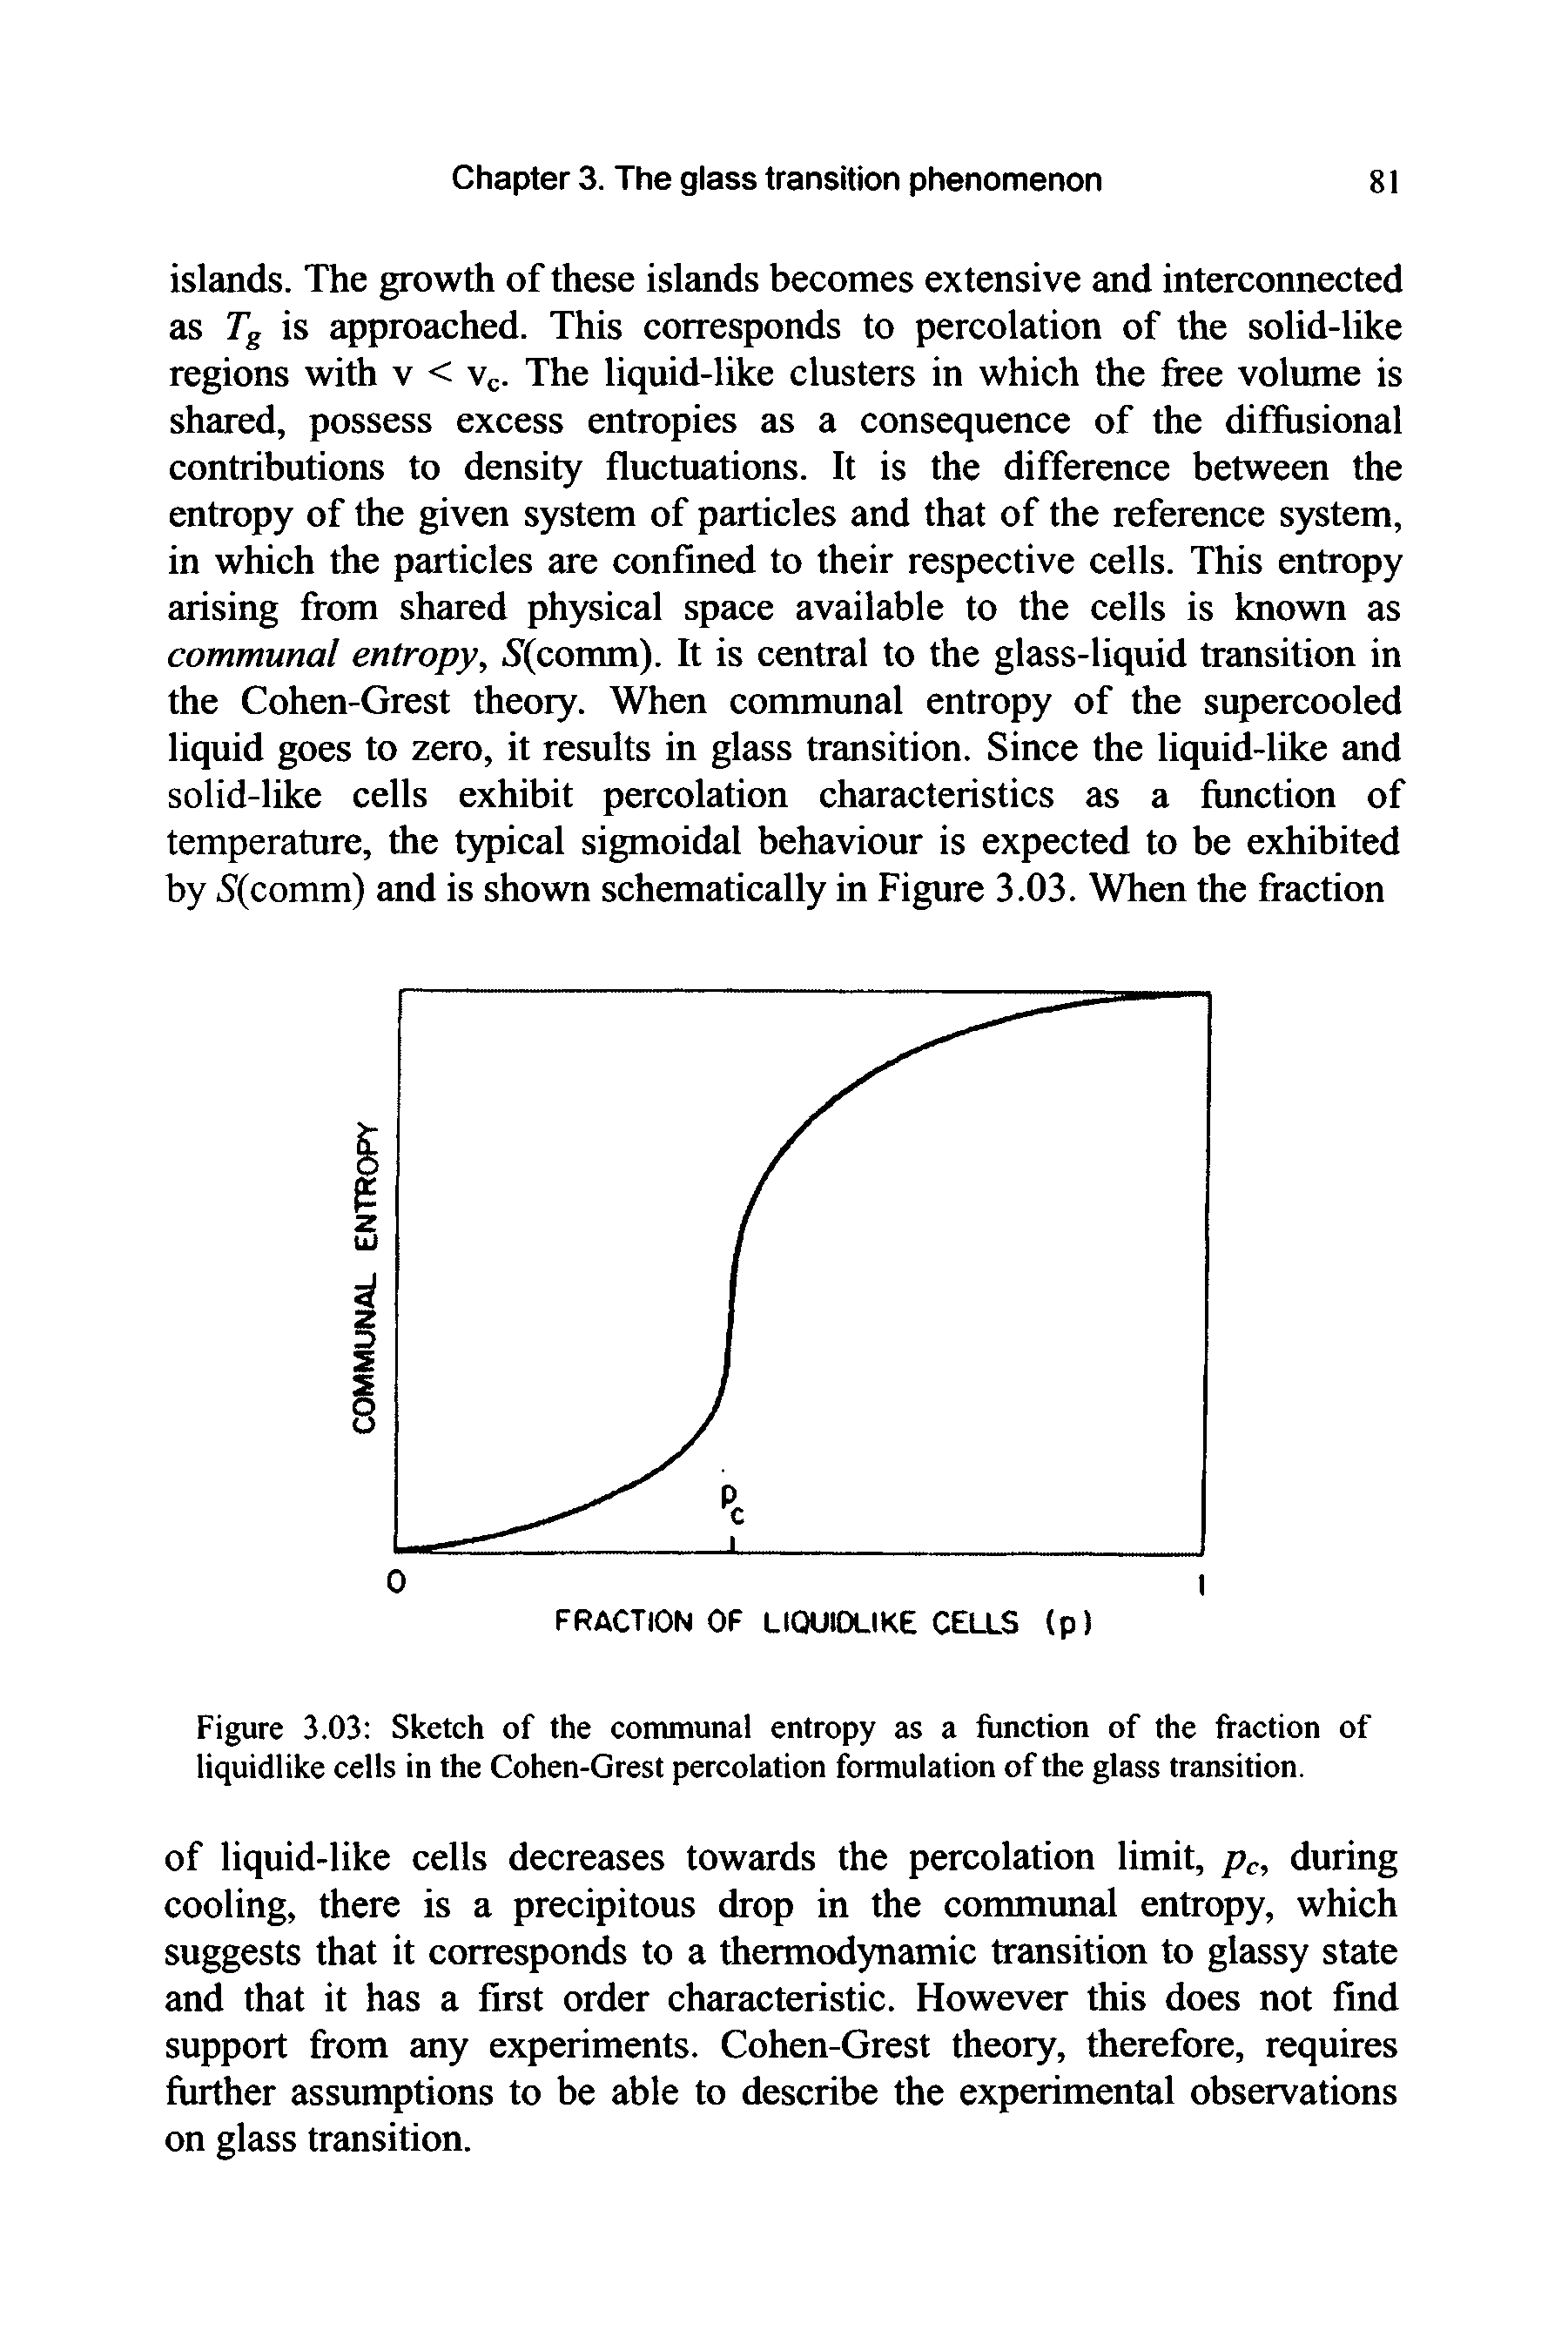 Figure 3.03 Sketch of the communal entropy as a function of the fraction of liquidlike cells in the Cohen-Grest percolation formulation of the glass transition.